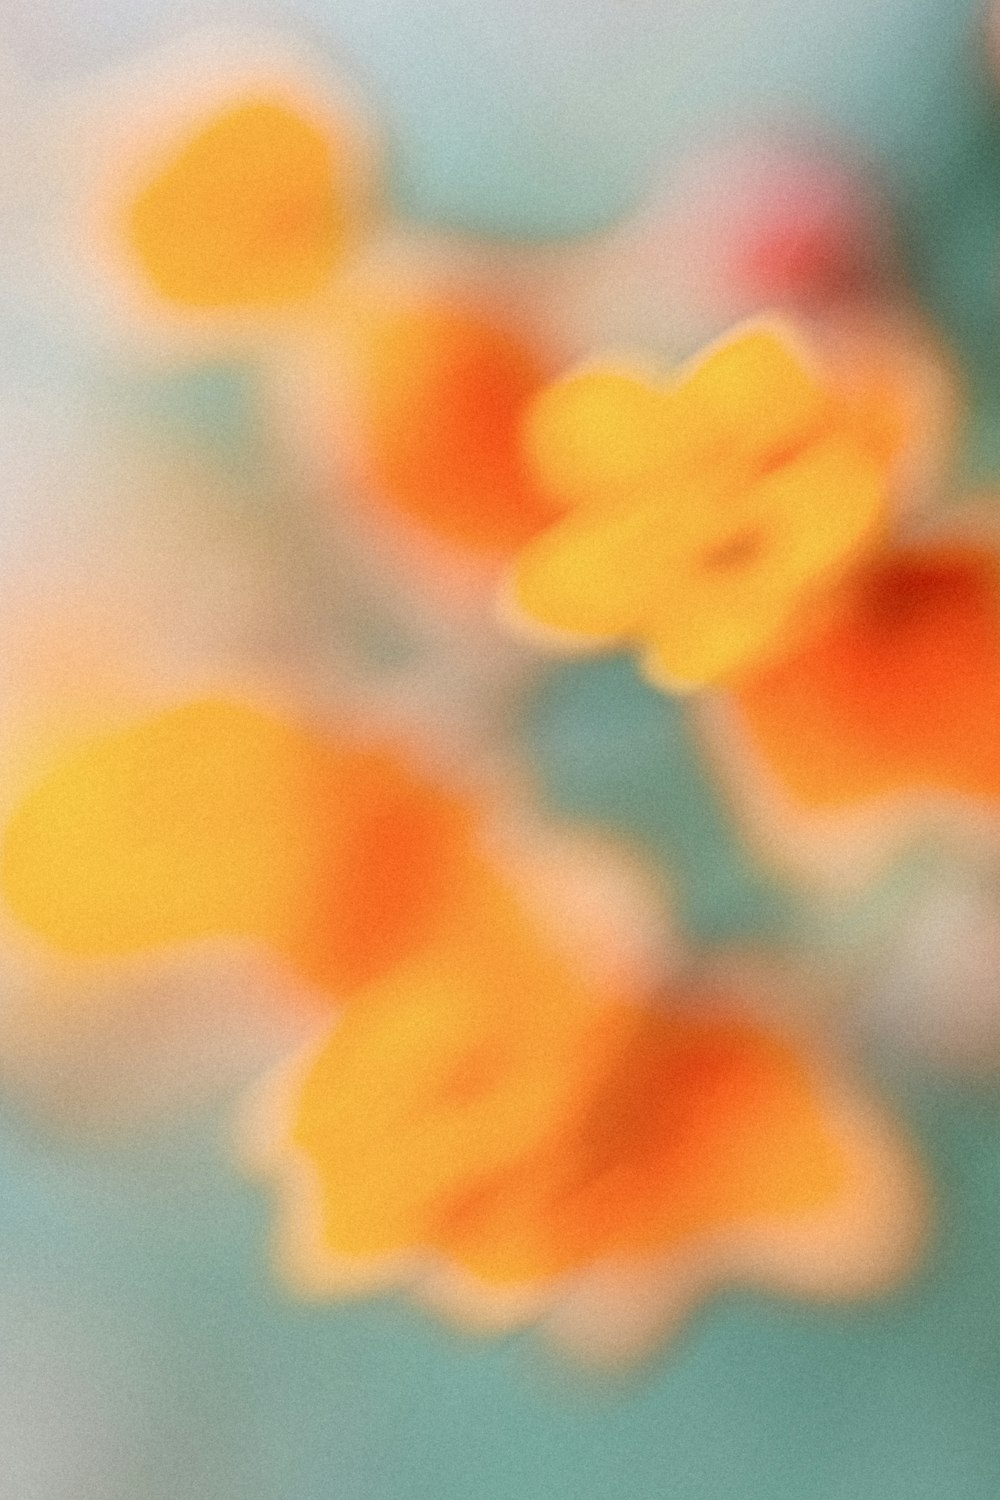 a blurry photo of orange and yellow flowers